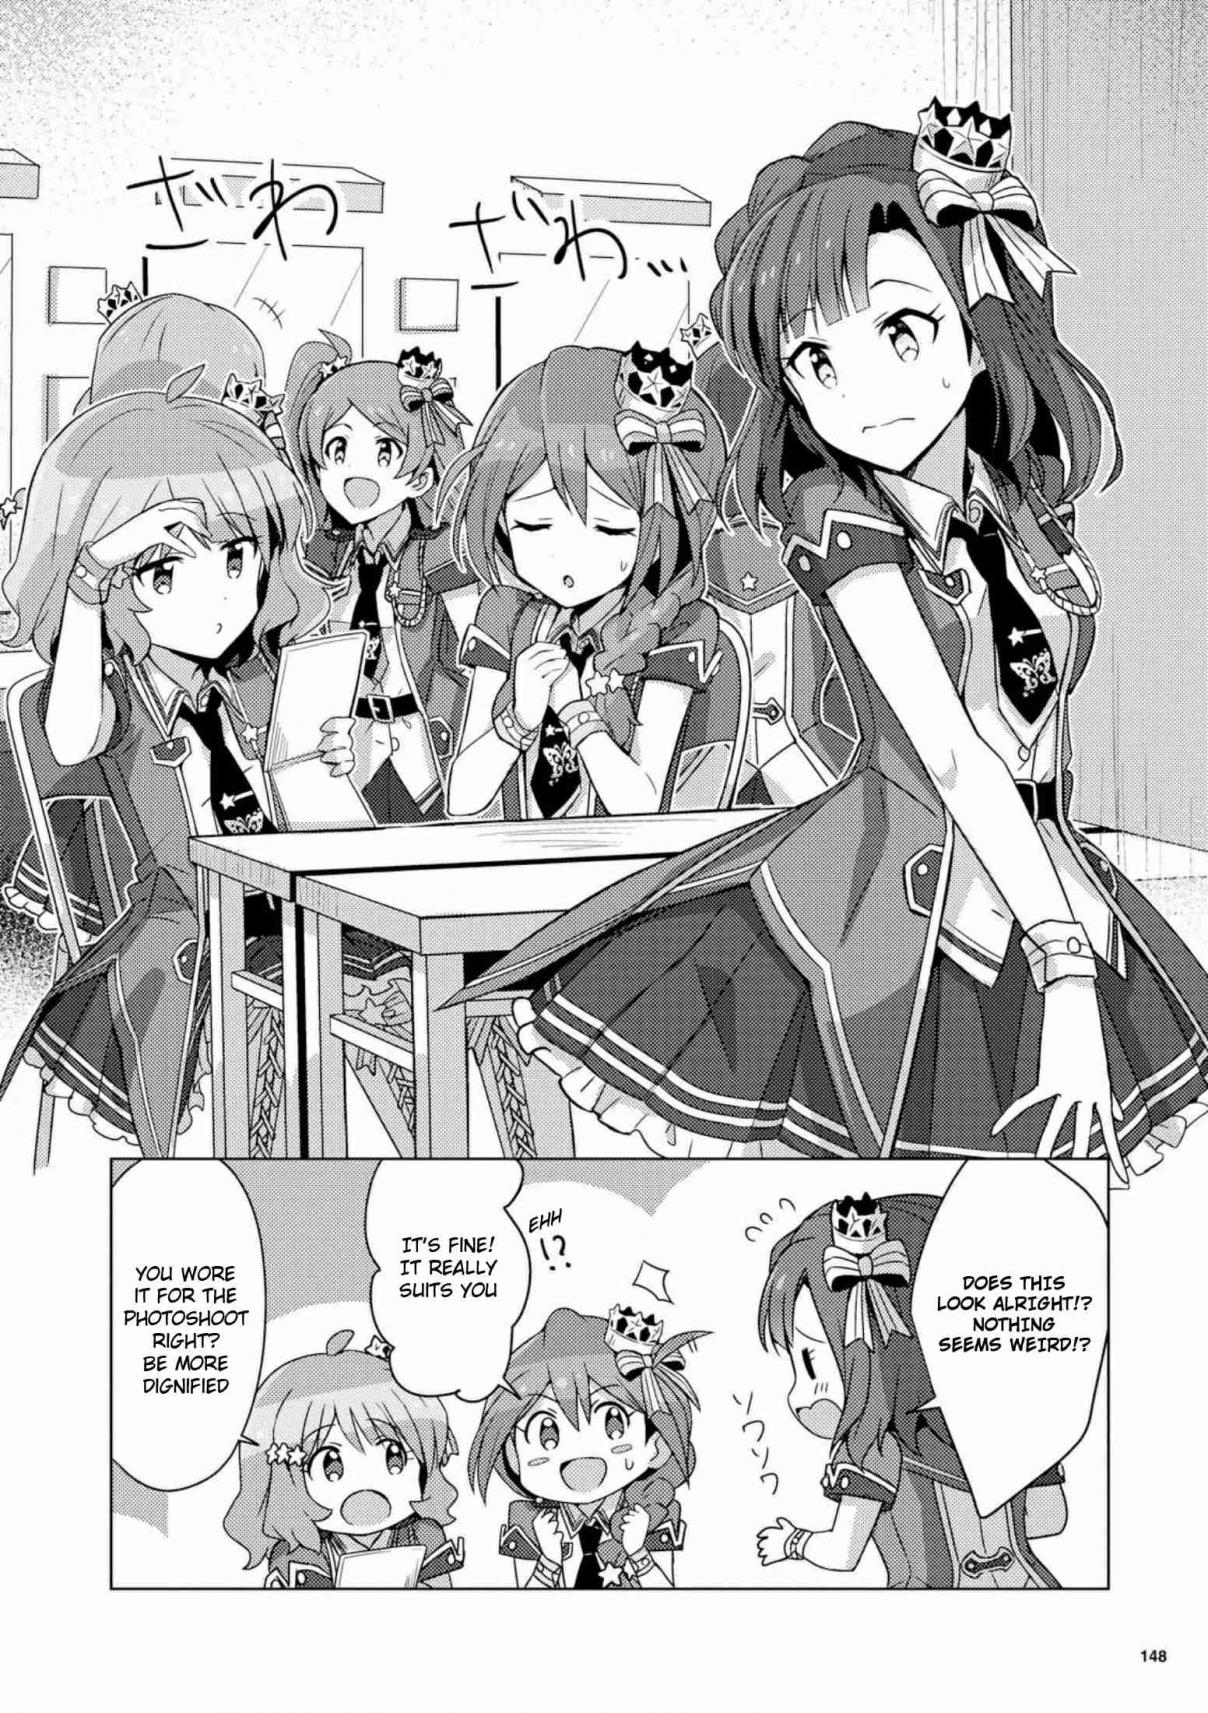 The Idolm@ster Million Live! Theater Days Brand New Song Ch. 2 From Hereon